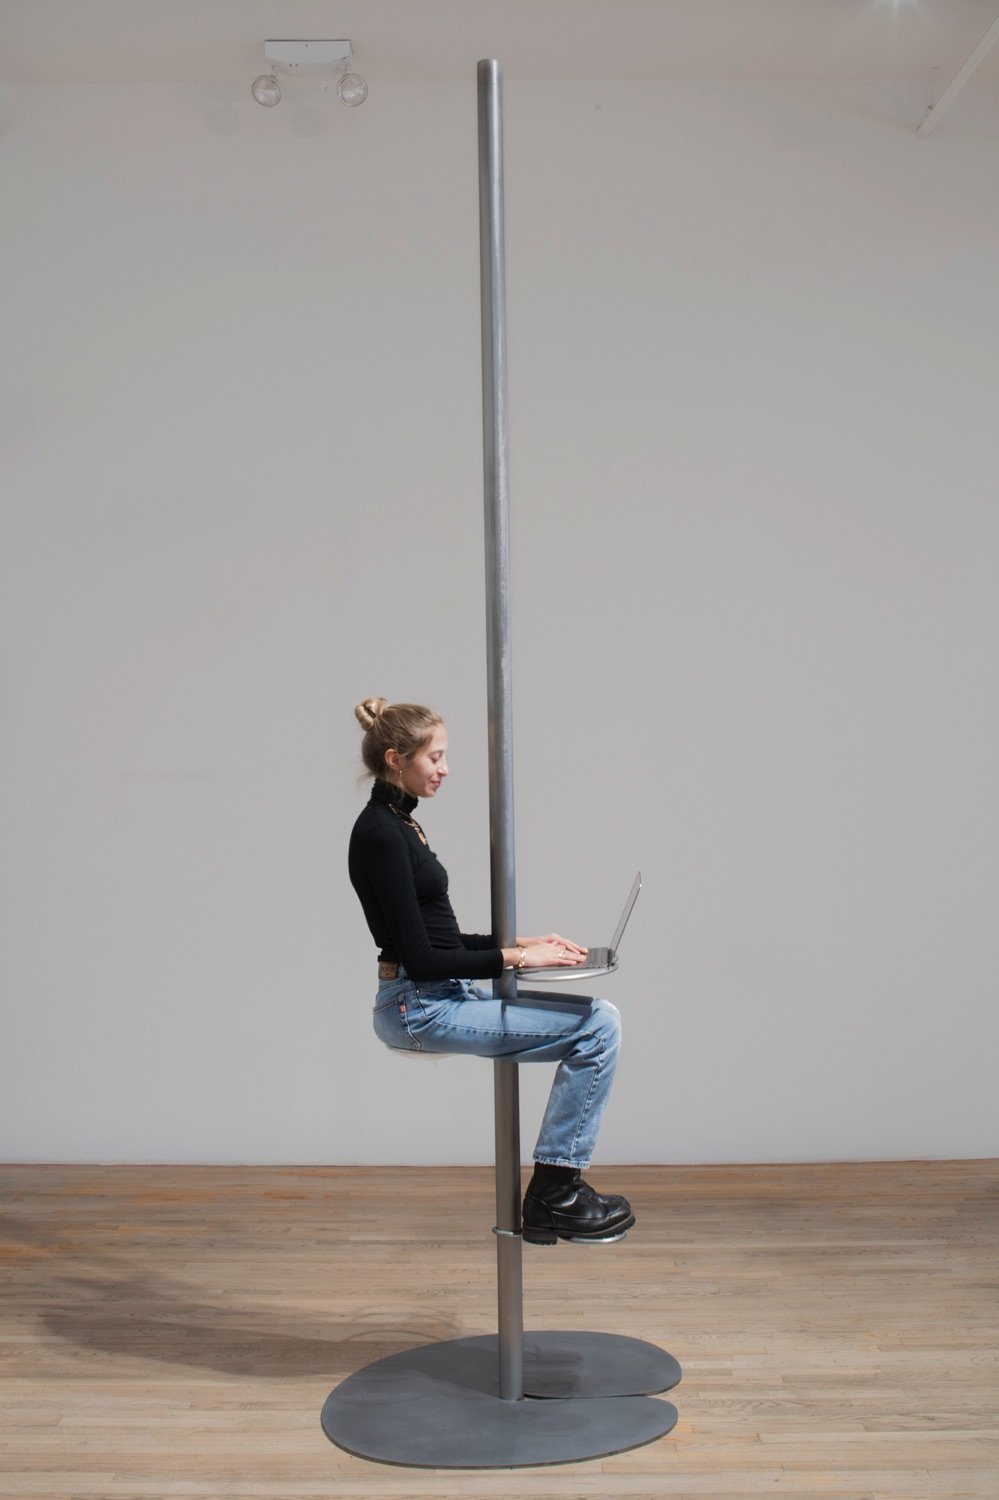  Stainless steel Pole Chair design by artist Chando Ao. 